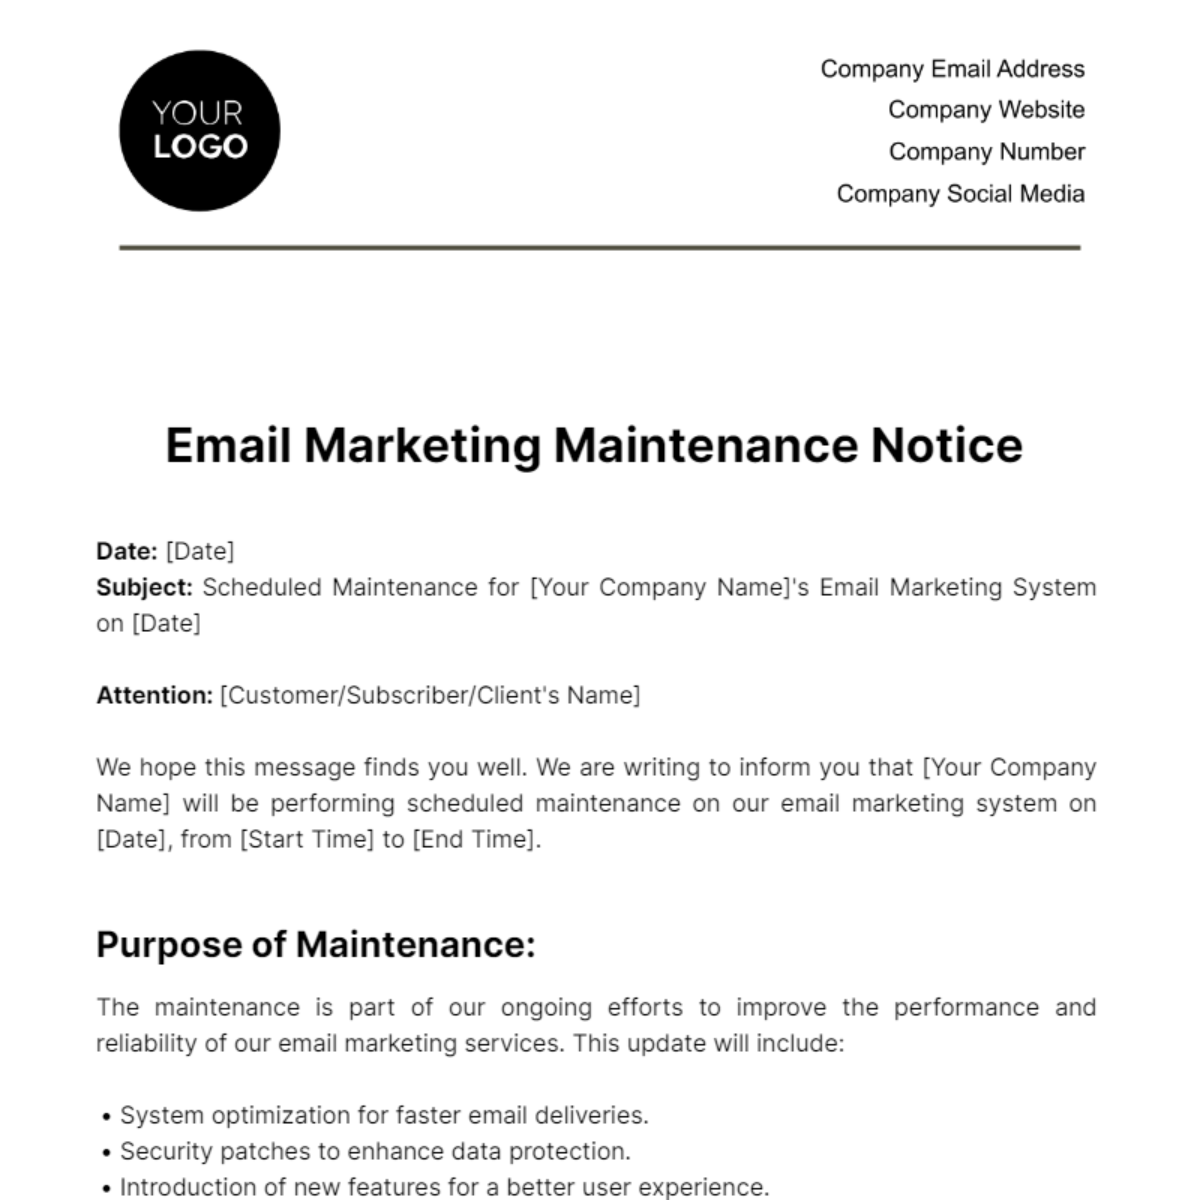 Email Marketing Maintenance Notice Template